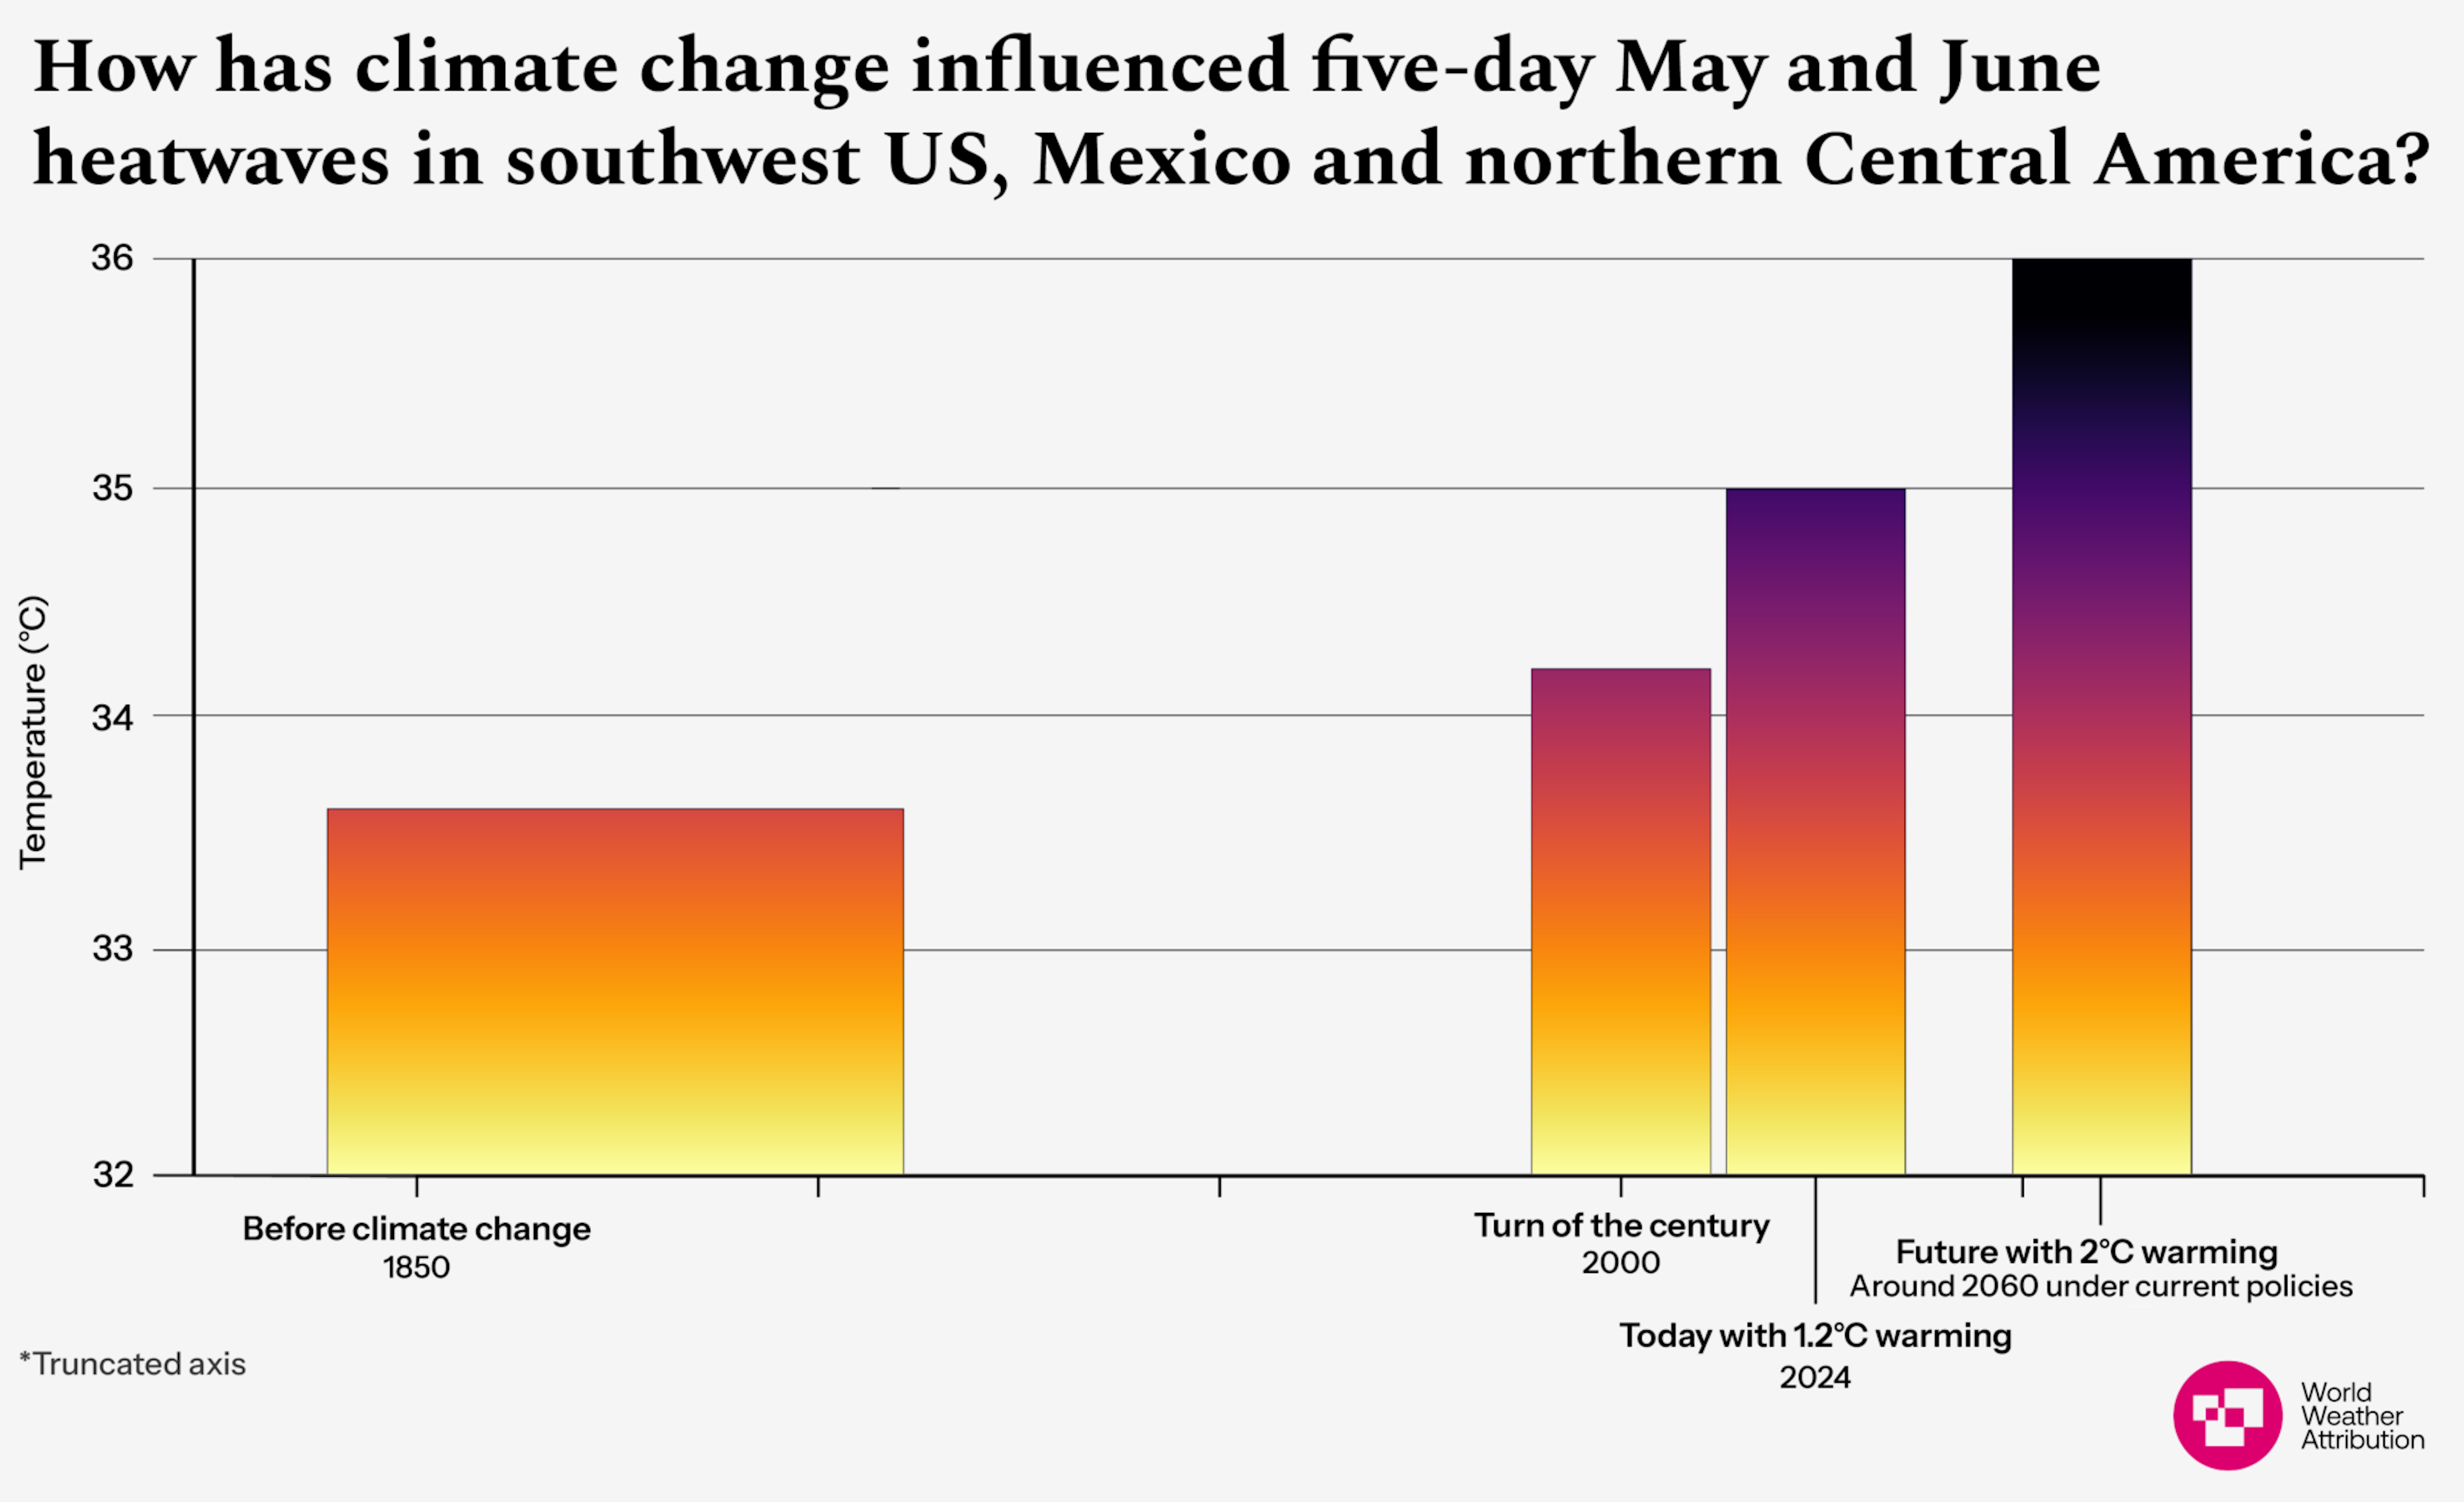 Influence of global warming on the temperatures of five-day May-June heatwaves in Southwest U.S., Mexico, and northern Central America. under 1.2°C and 2°C of warming. With 2°C of warming, these heatwaves will be nearly 2°C hotter than those in the year 2000. Graphic: World Weather Attribution